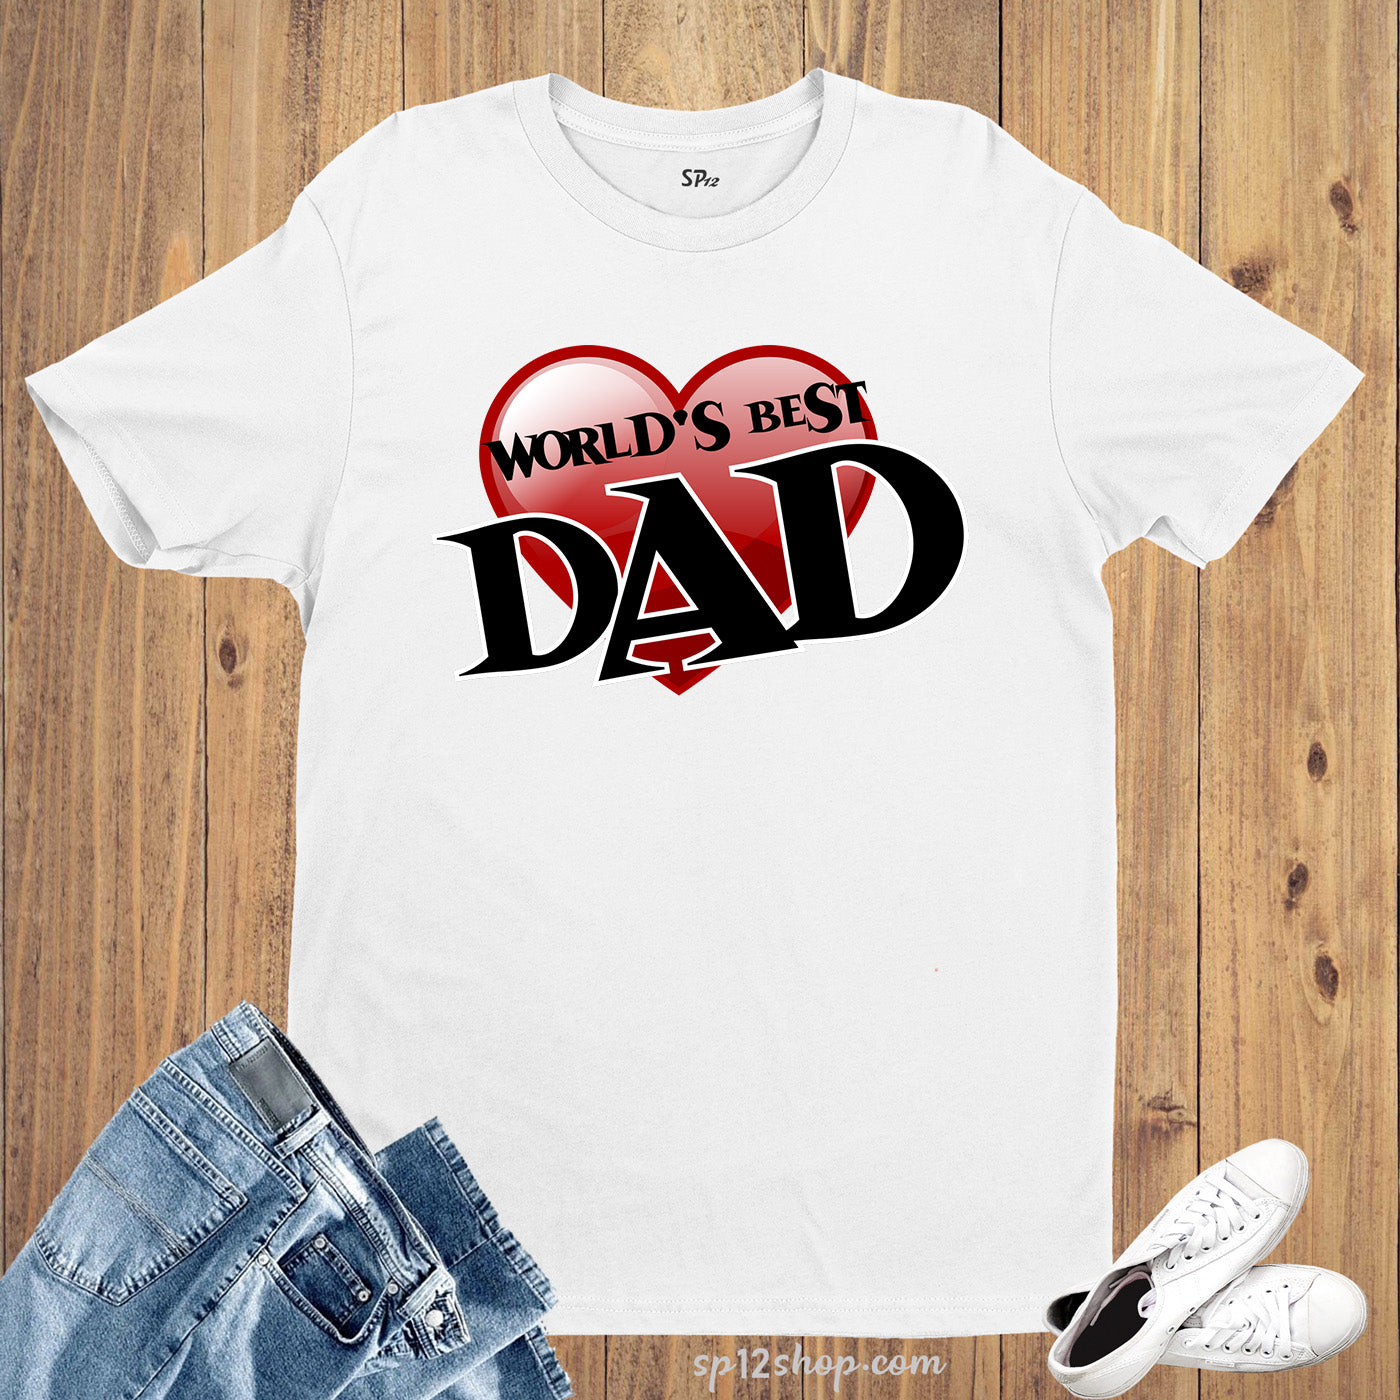 Family Father's Day Cool T Shirt Worlds Best Dad tshirt Tee